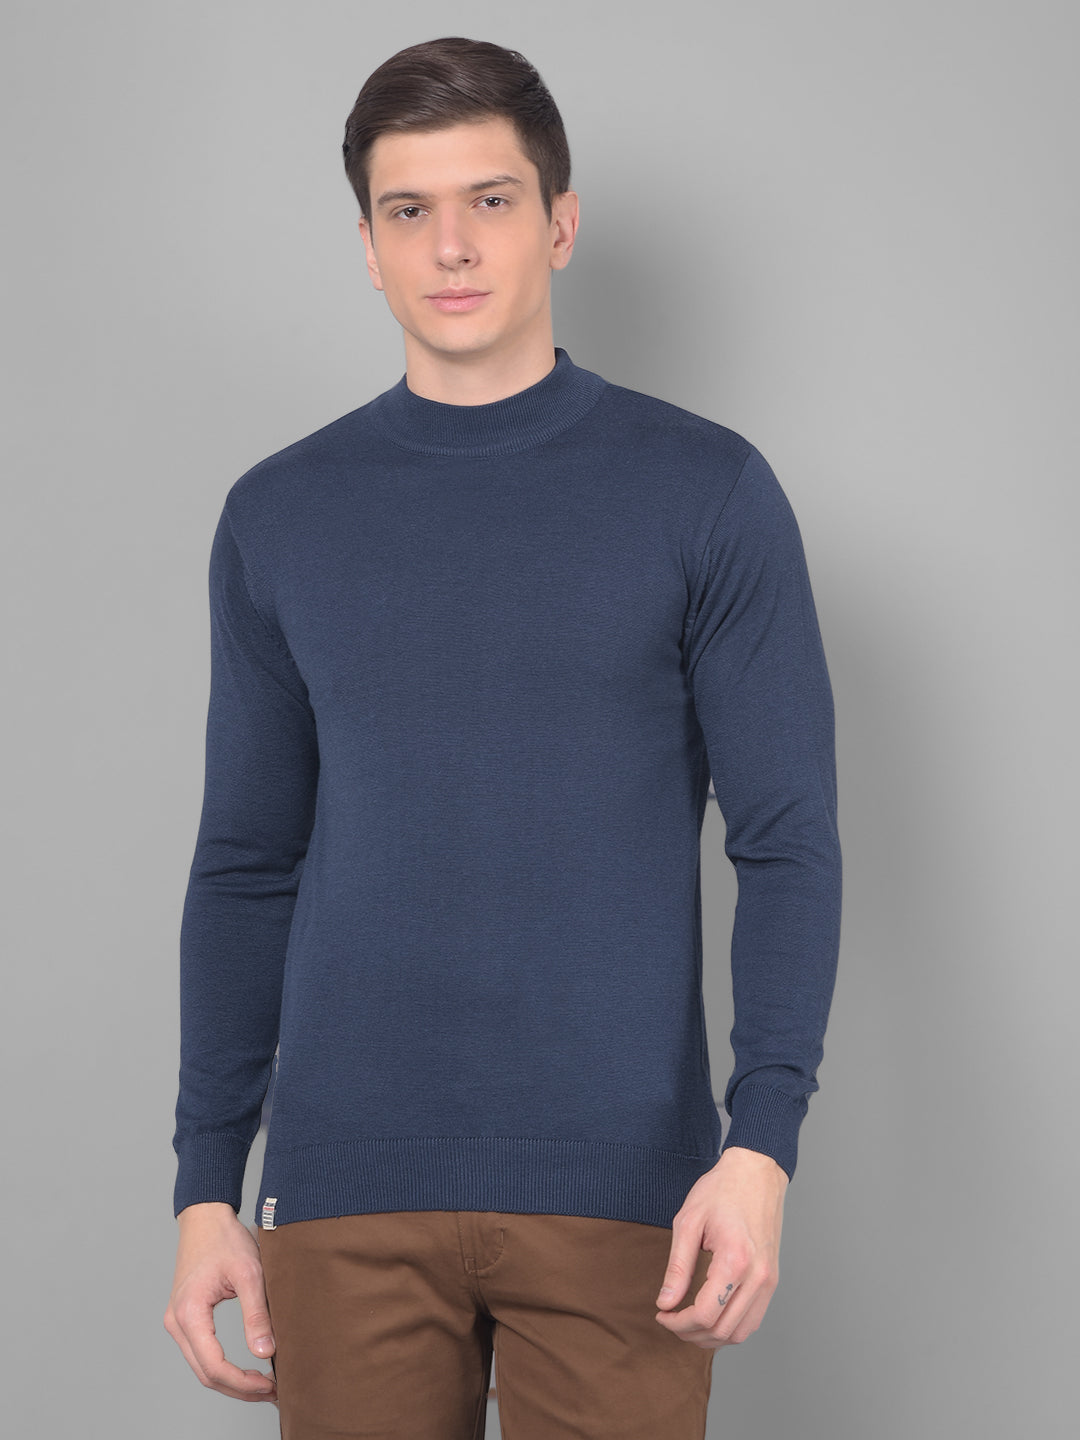 cobb solid navy blue high neck sweater